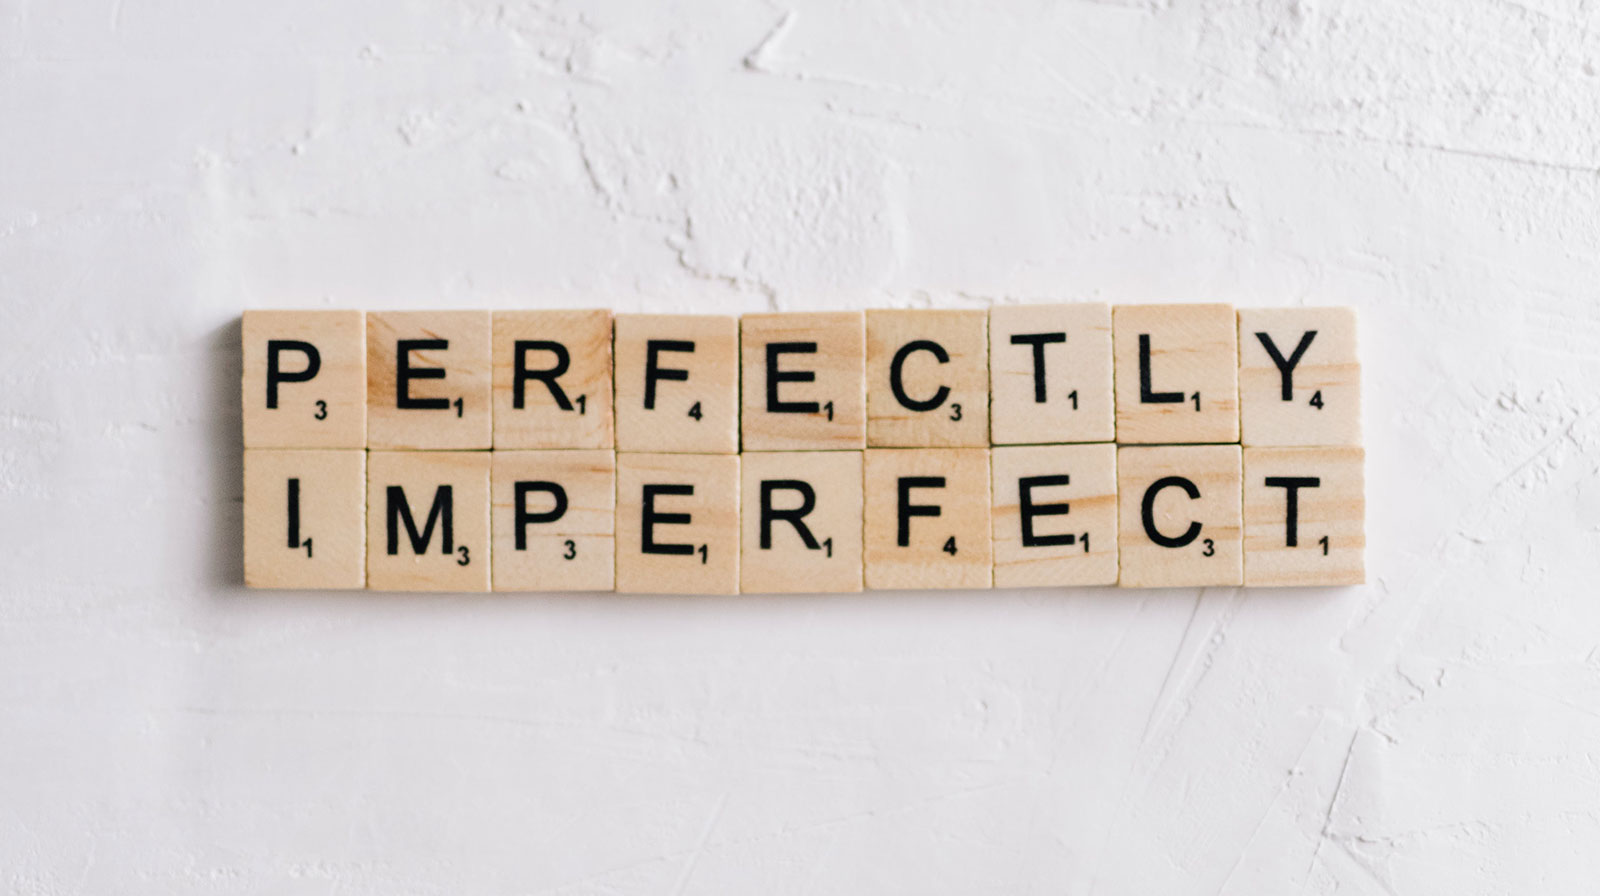 scrabble letters that spell perfectly imperfect